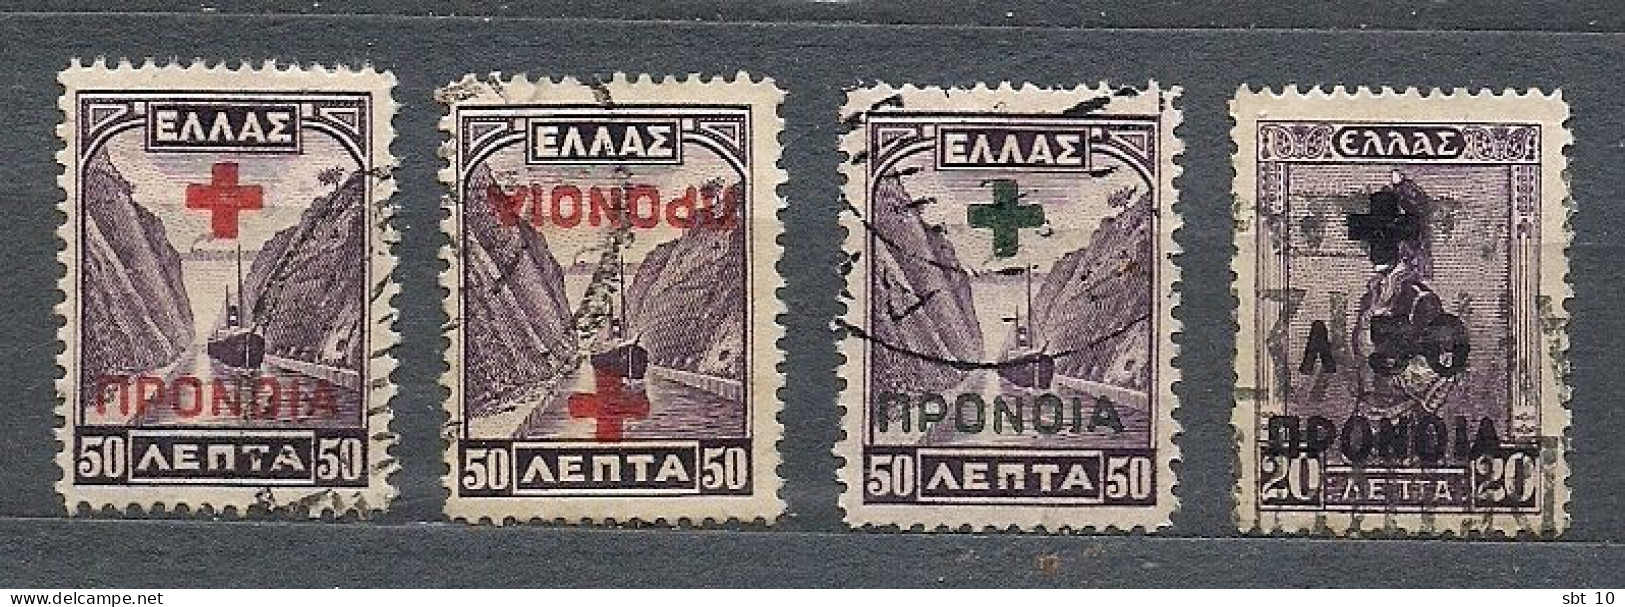 Greece 1937/38 - Social Welfare Fund Overprints - Set Used - Charity Issues